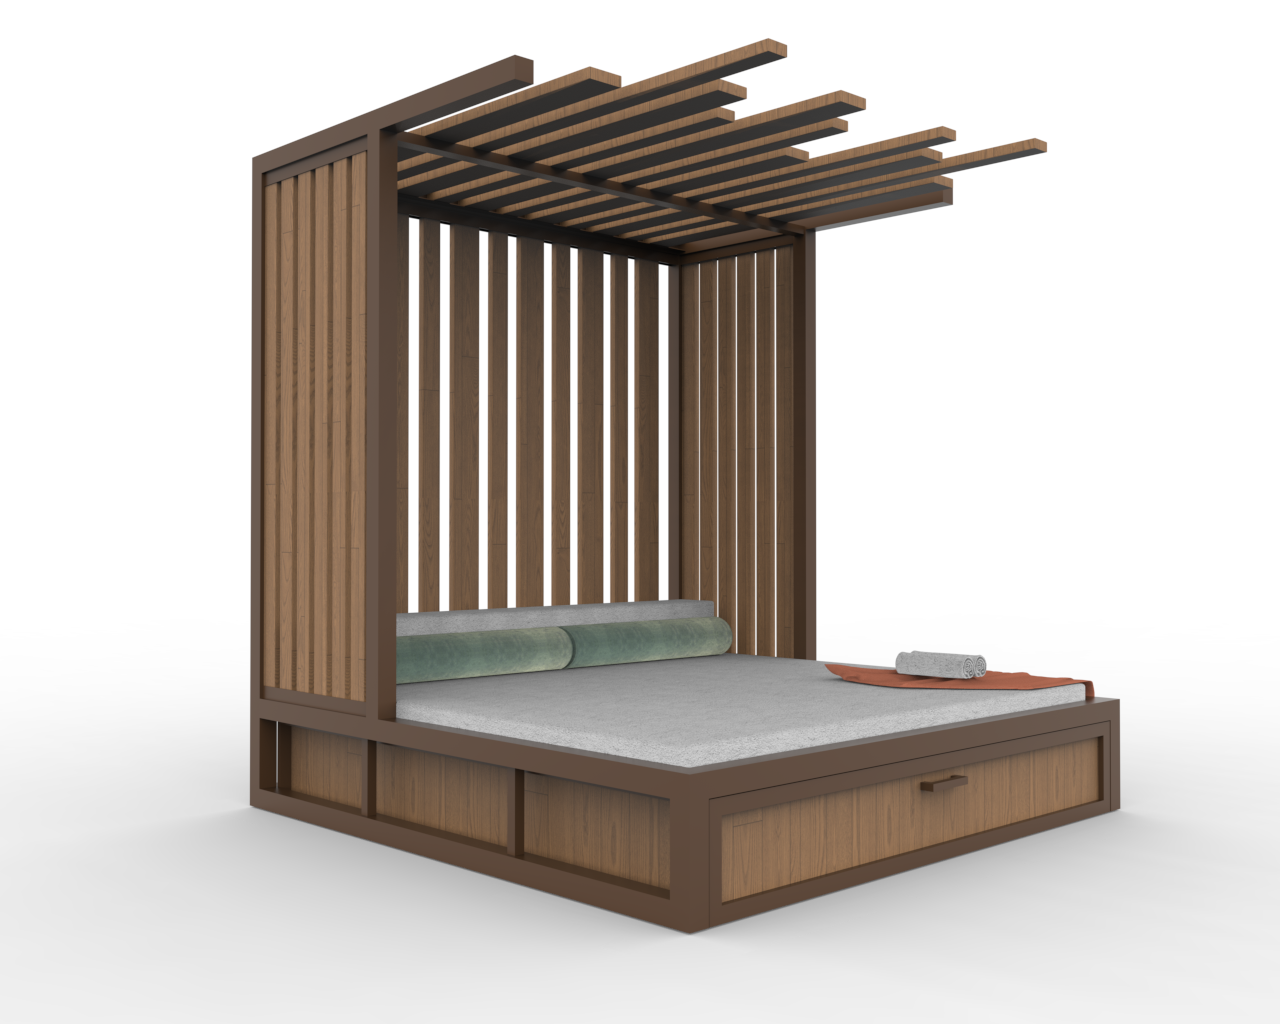 Academy Design's Castaway daybed, left perspective view, emphasizing its corrosion-resistant 6061-T6 aluminum frame. The side showcases a portion with slats, while the rest is open air, and the roof features a distinct jagged slat design, capturing the essence of a tropical paradise.